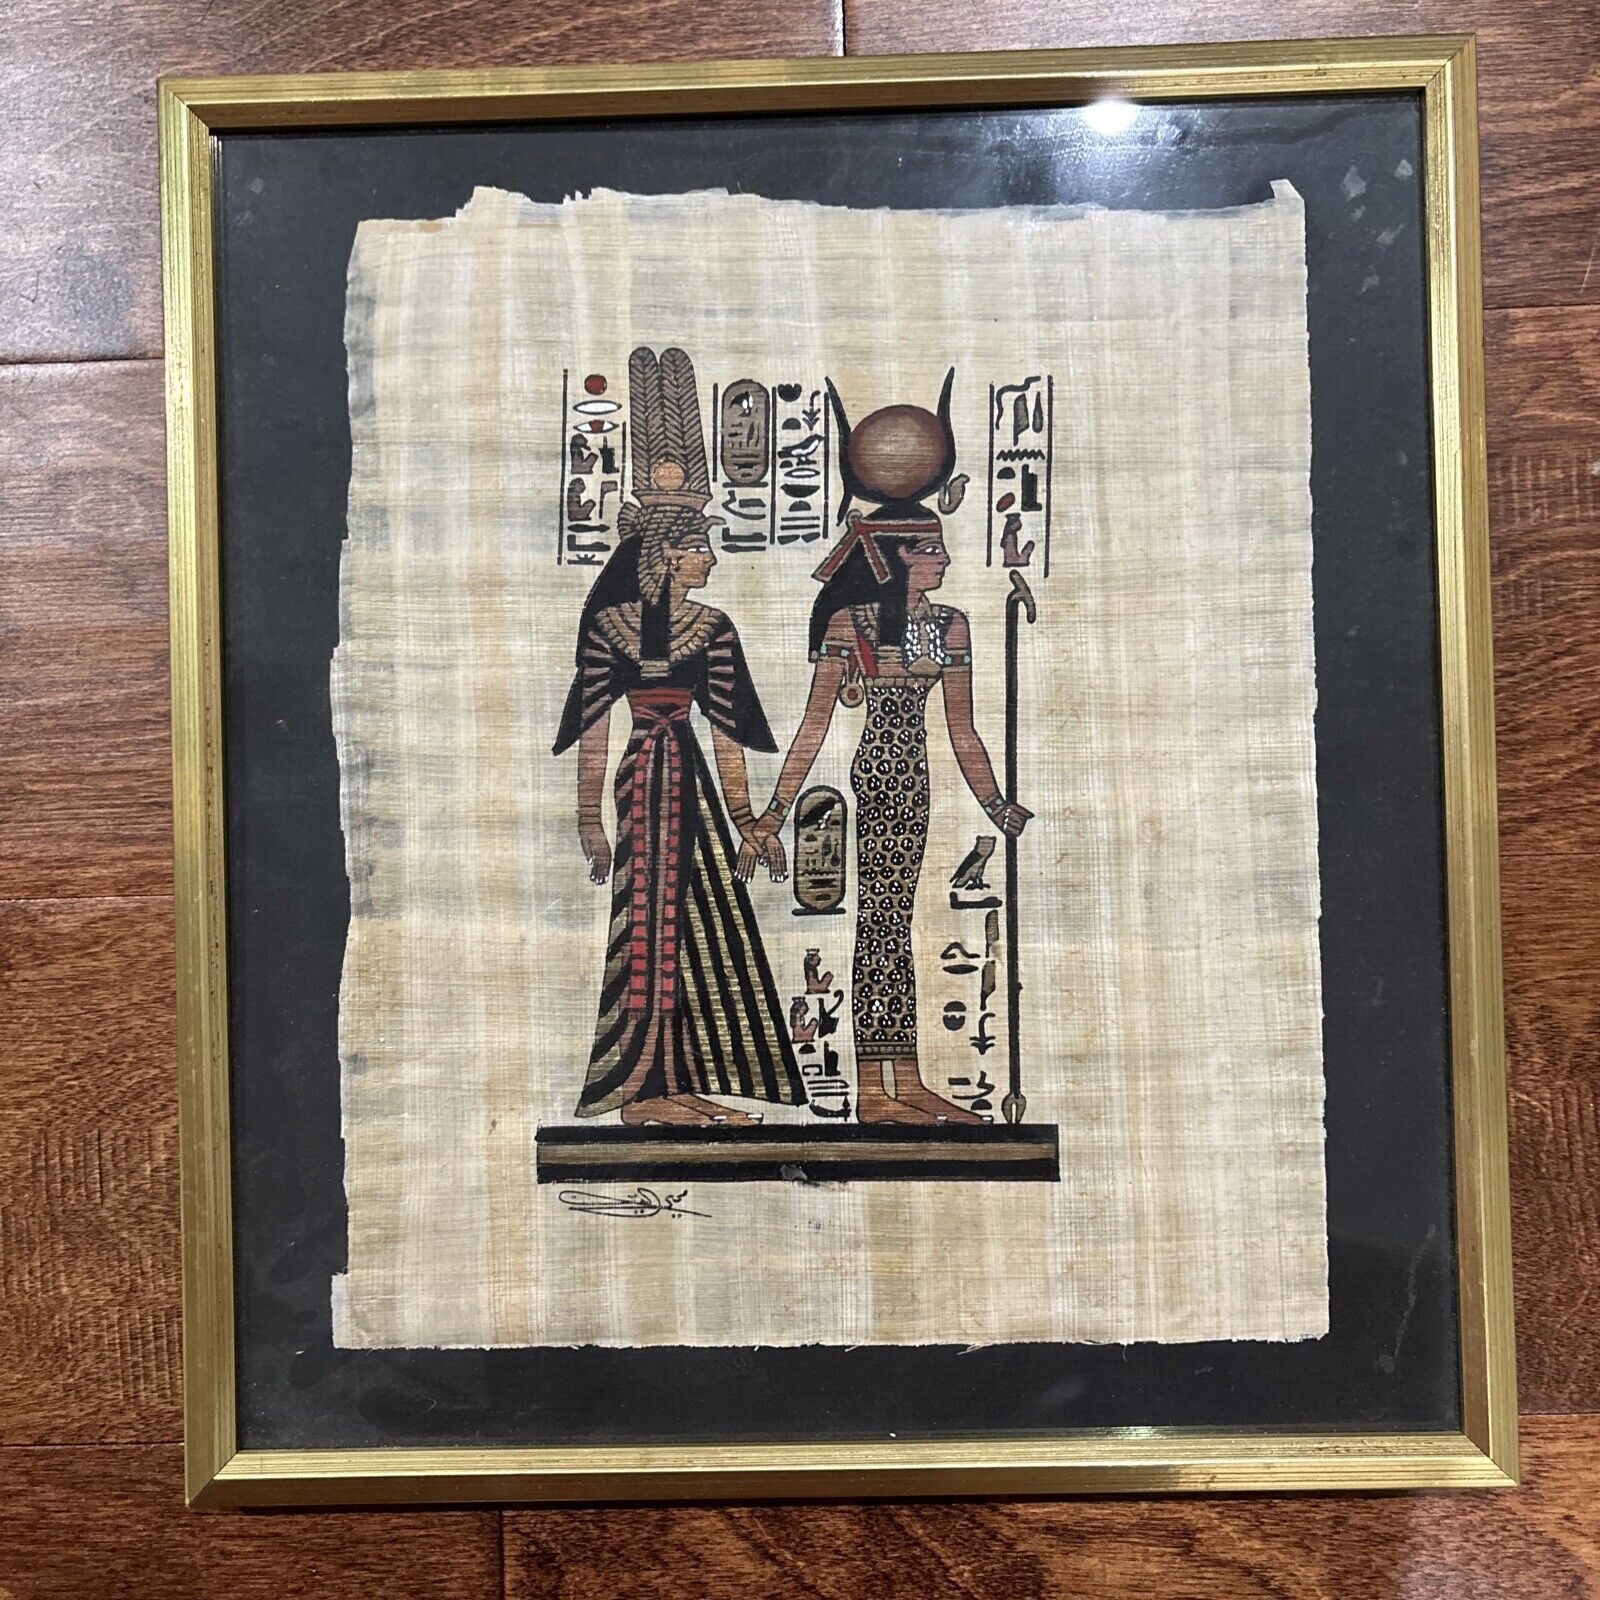 Egyptian Hand-Painted Detailed Art on Papyrus Paper Framed Signed 11.5”x12.75”